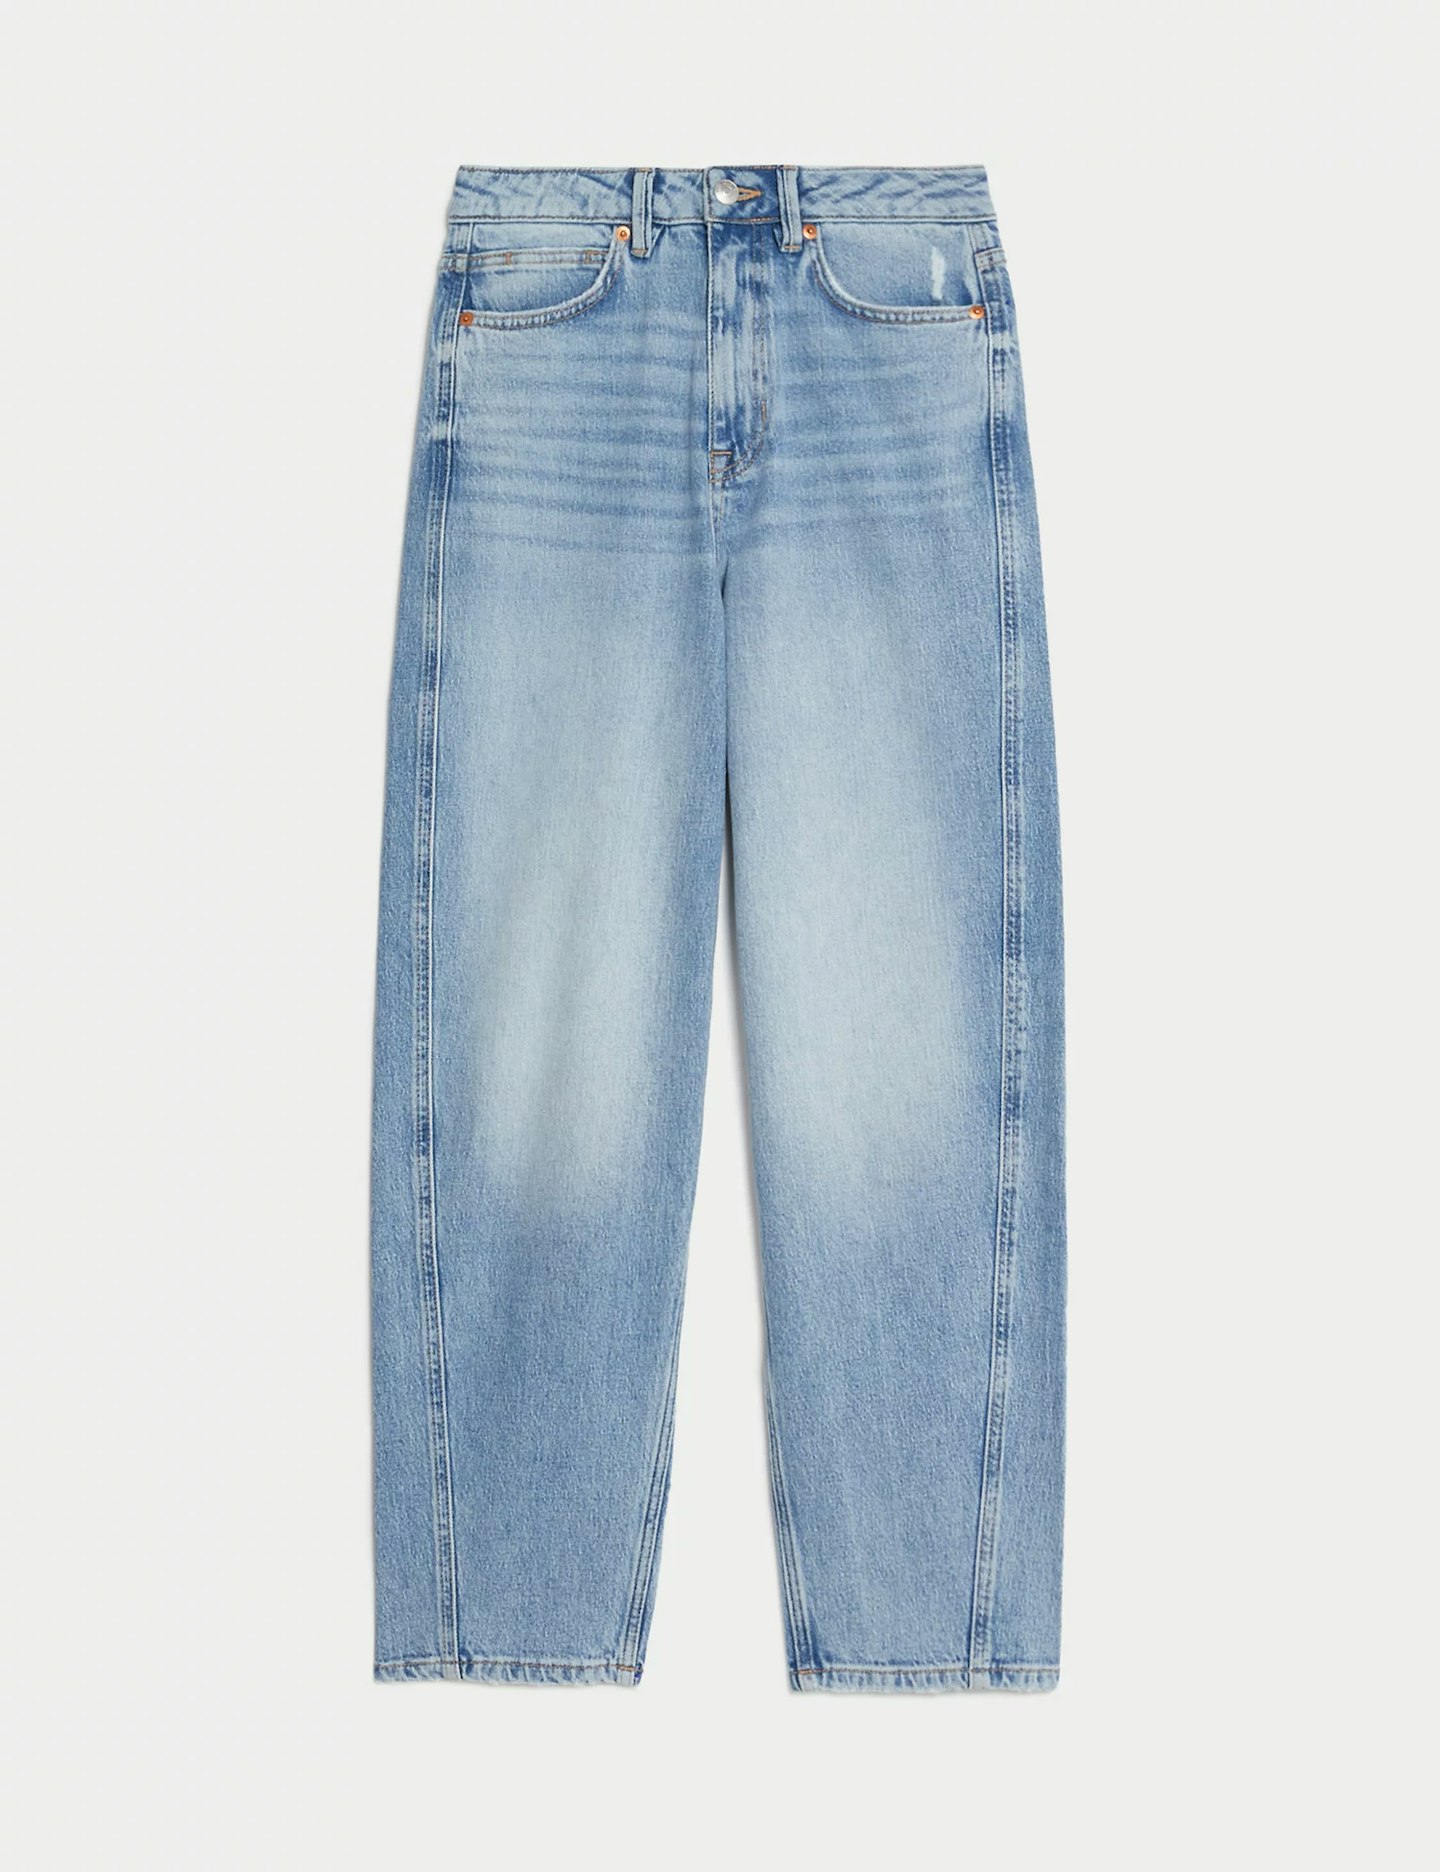 The Chronicle on X: Marks and Spencer shoppers say 'slimming' £39.50 jeans  are 'fabulously comfy'   / X